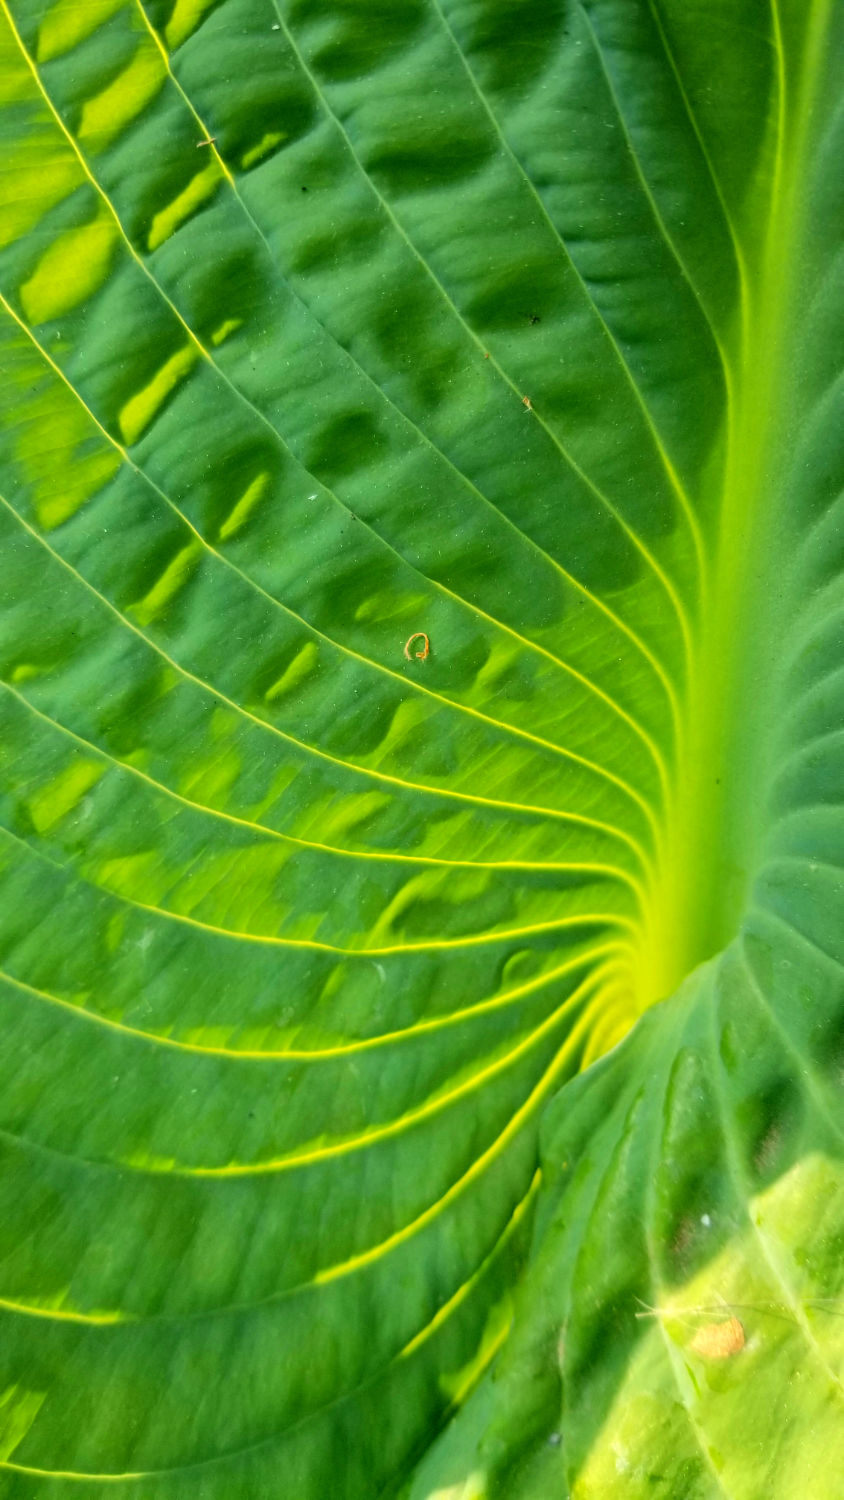 Closeup of bright green leaf with many yellow-green ribs